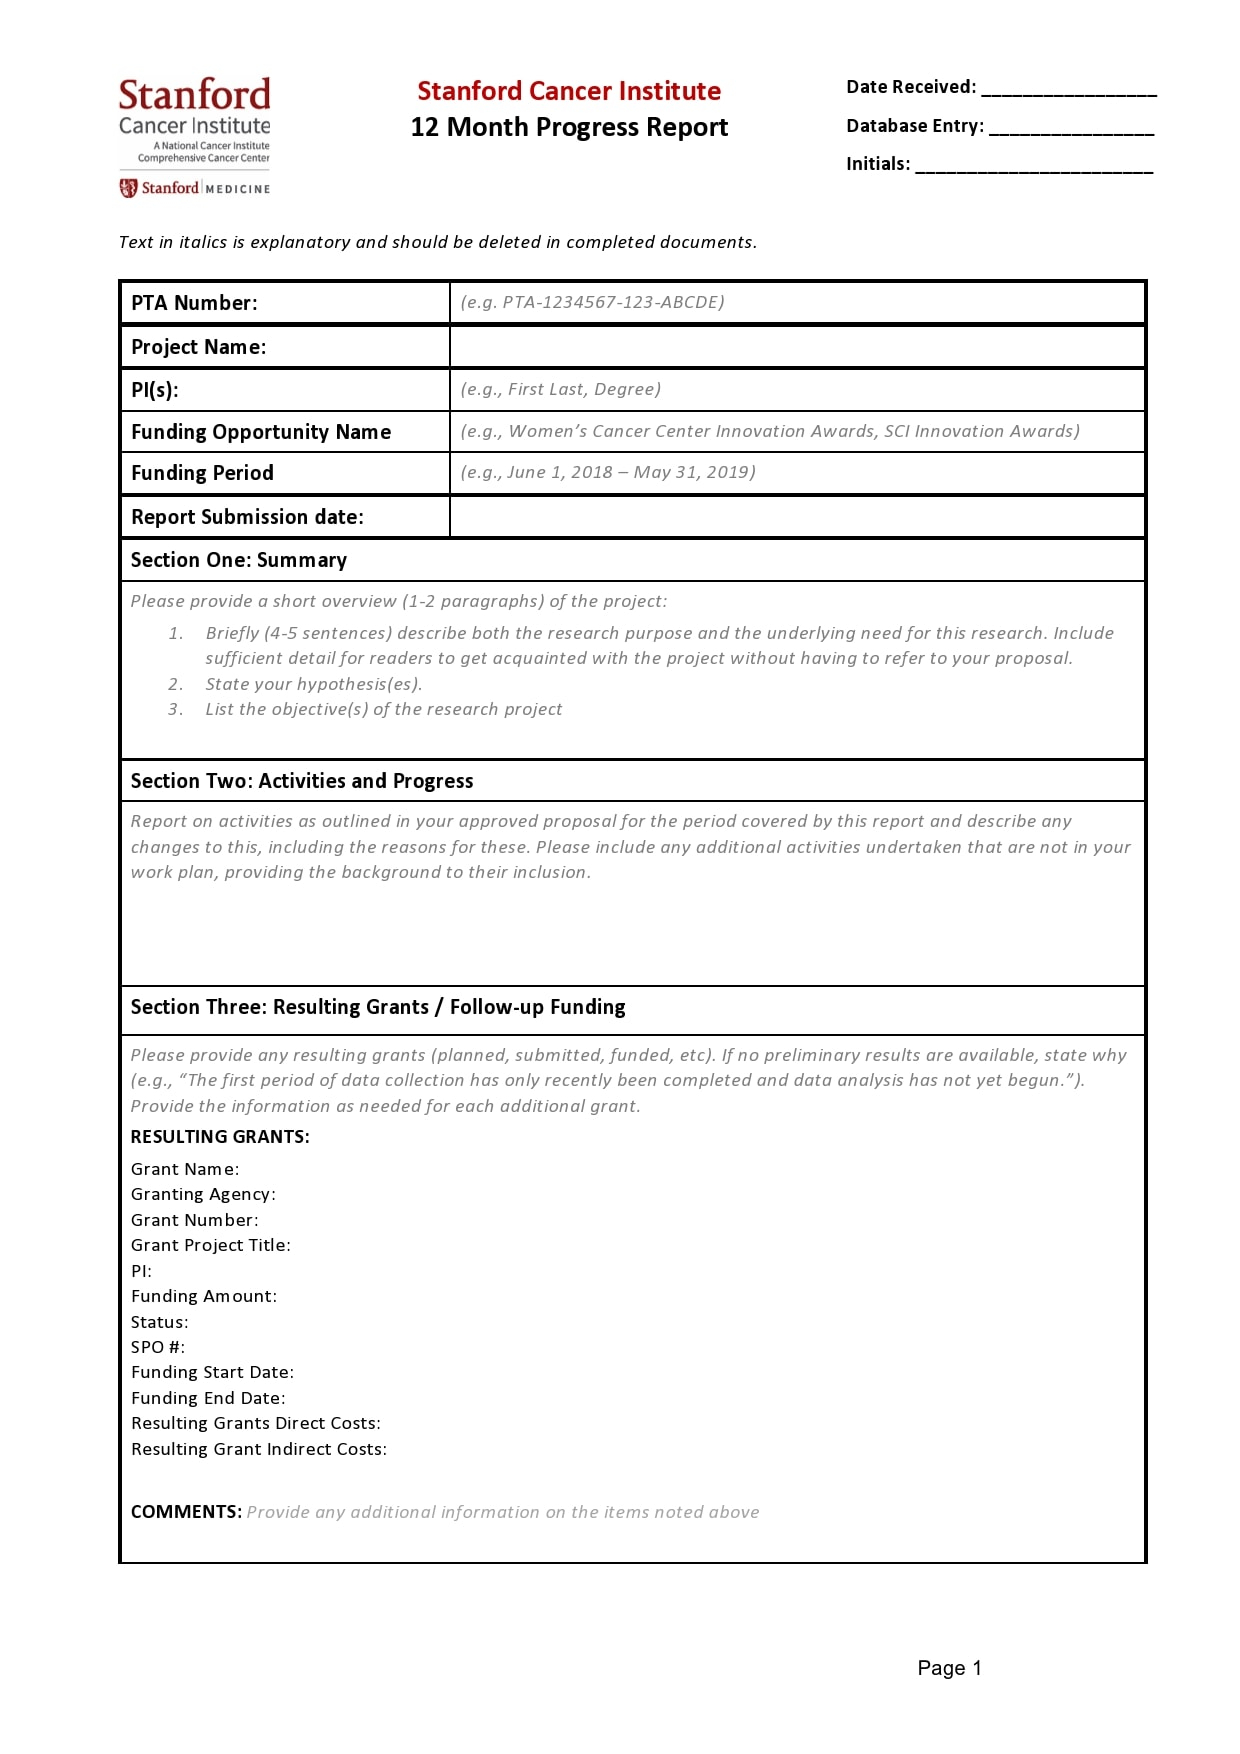 10 Professional Progress Report Templates (Free) - TemplateArchive Regarding Research Project Report Template